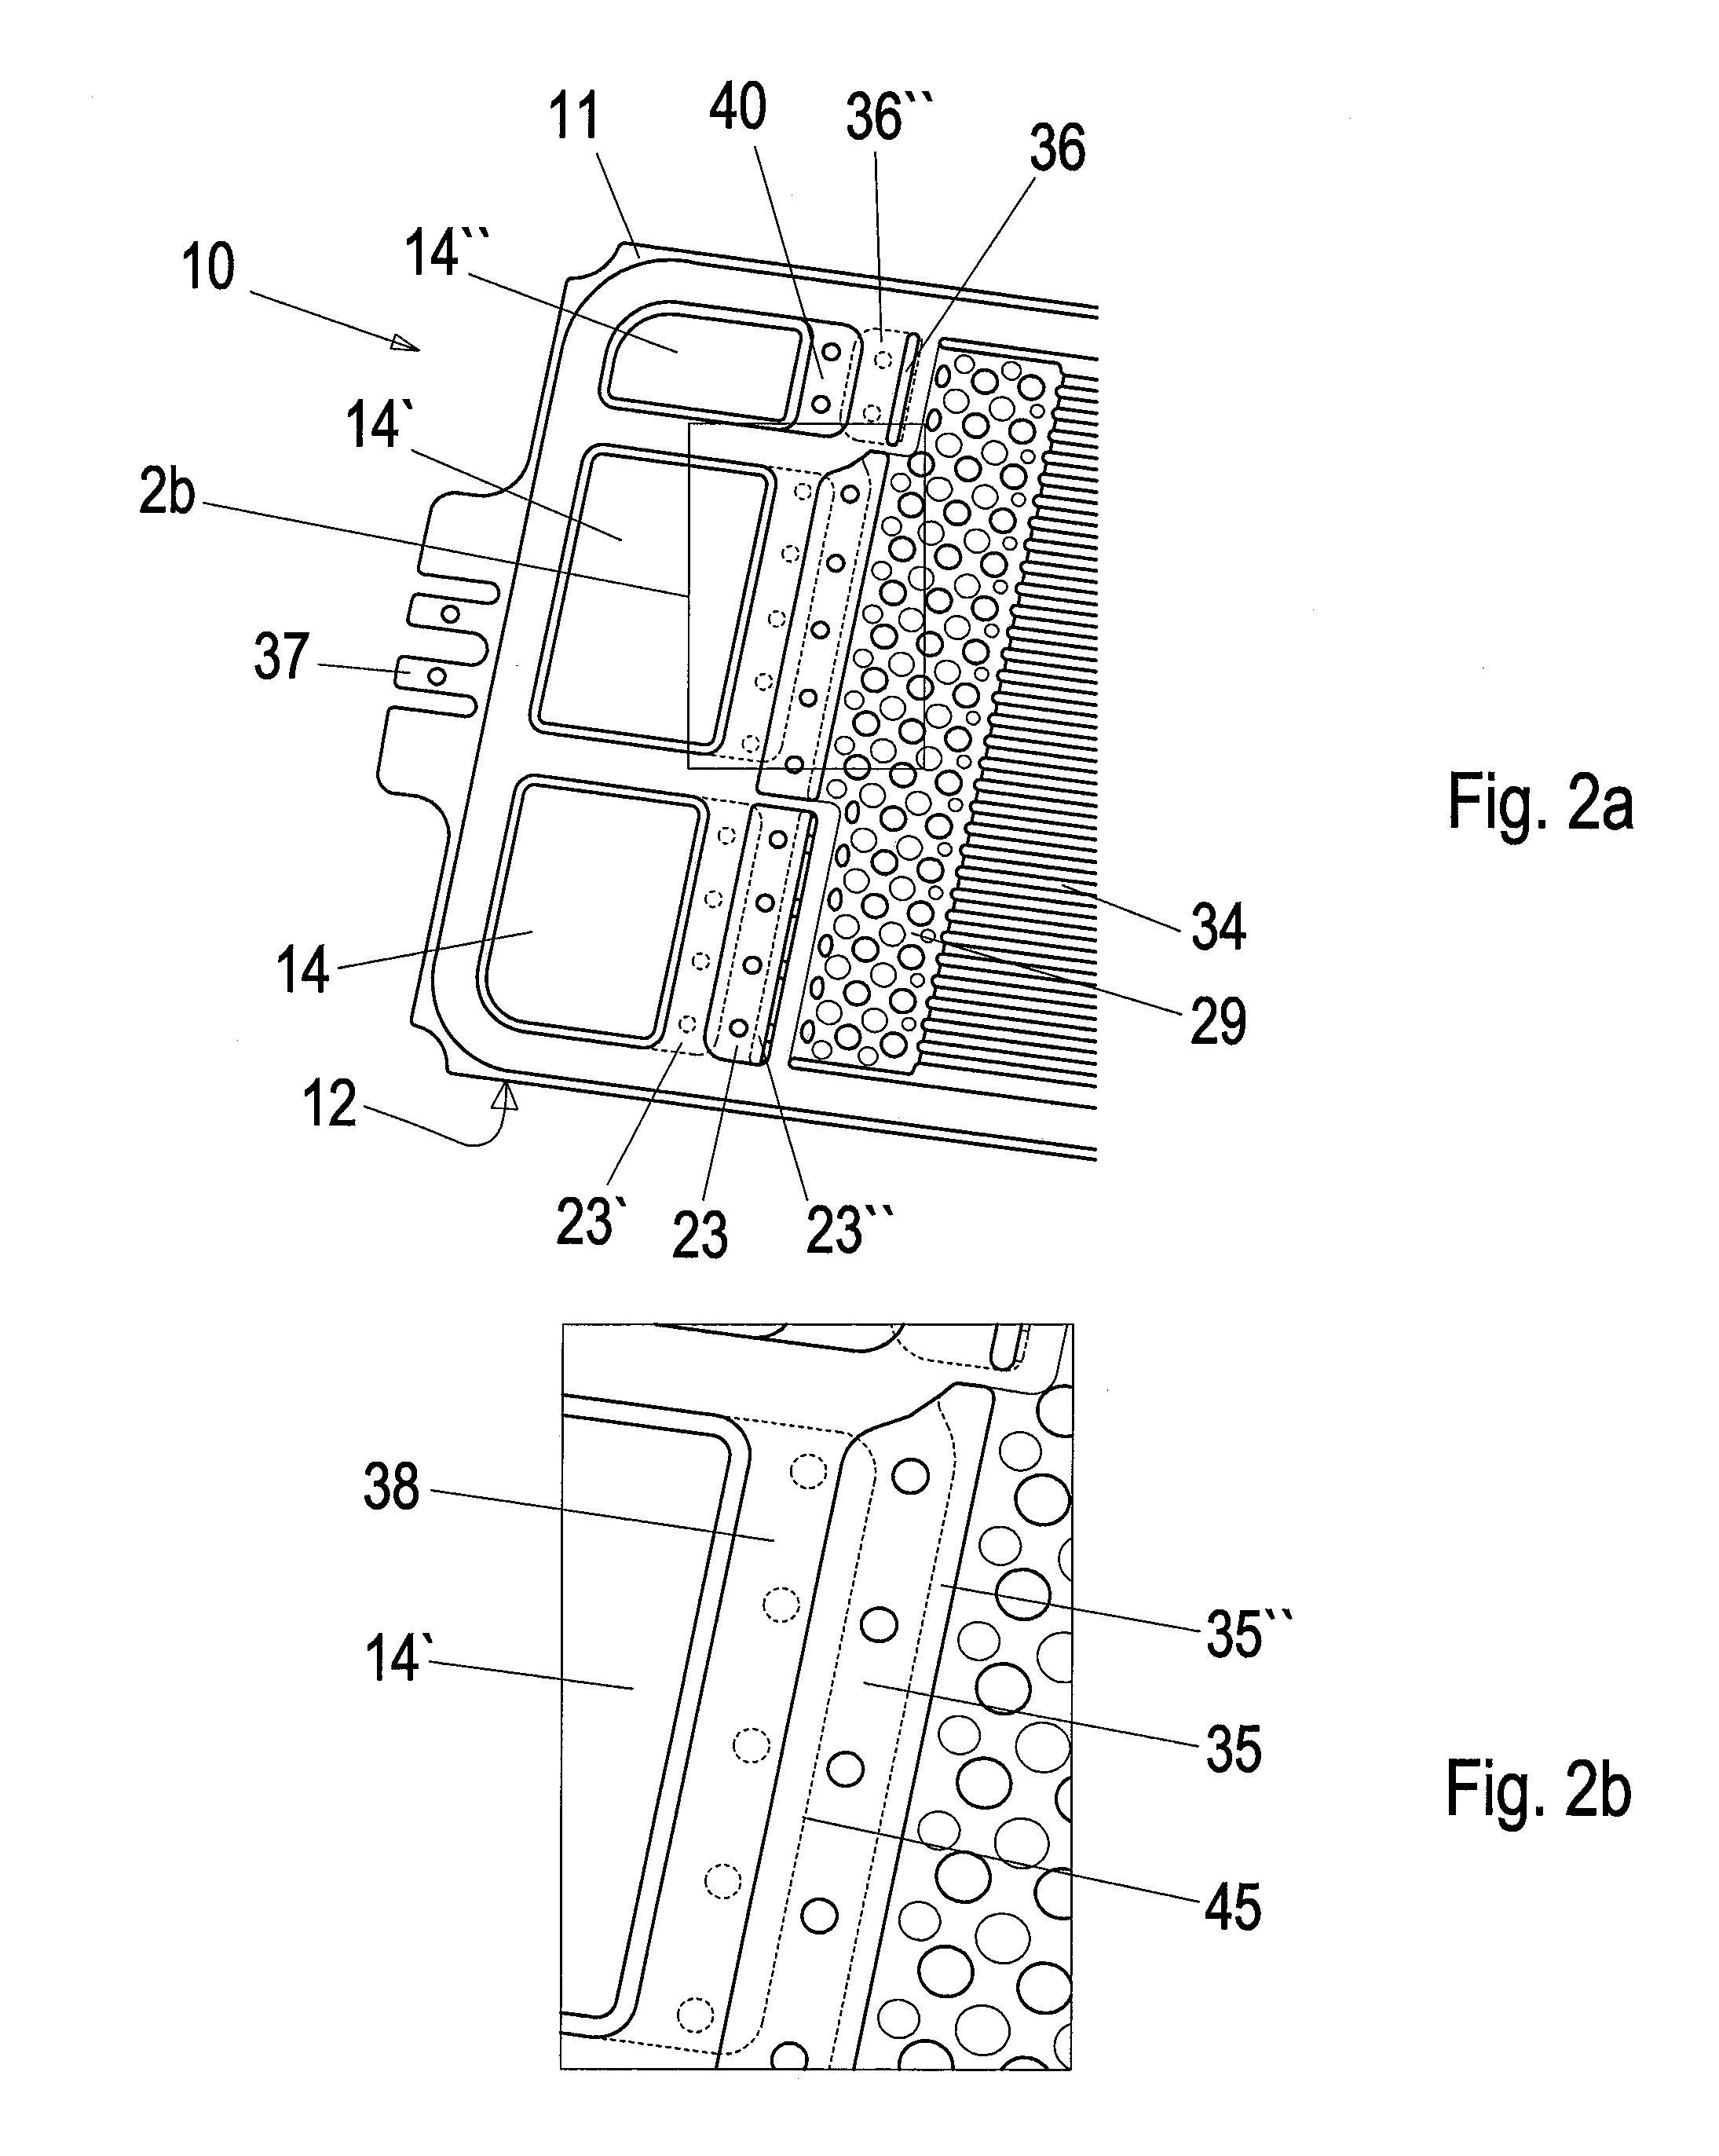 Bipolar Plate and Fuel Cell Unit